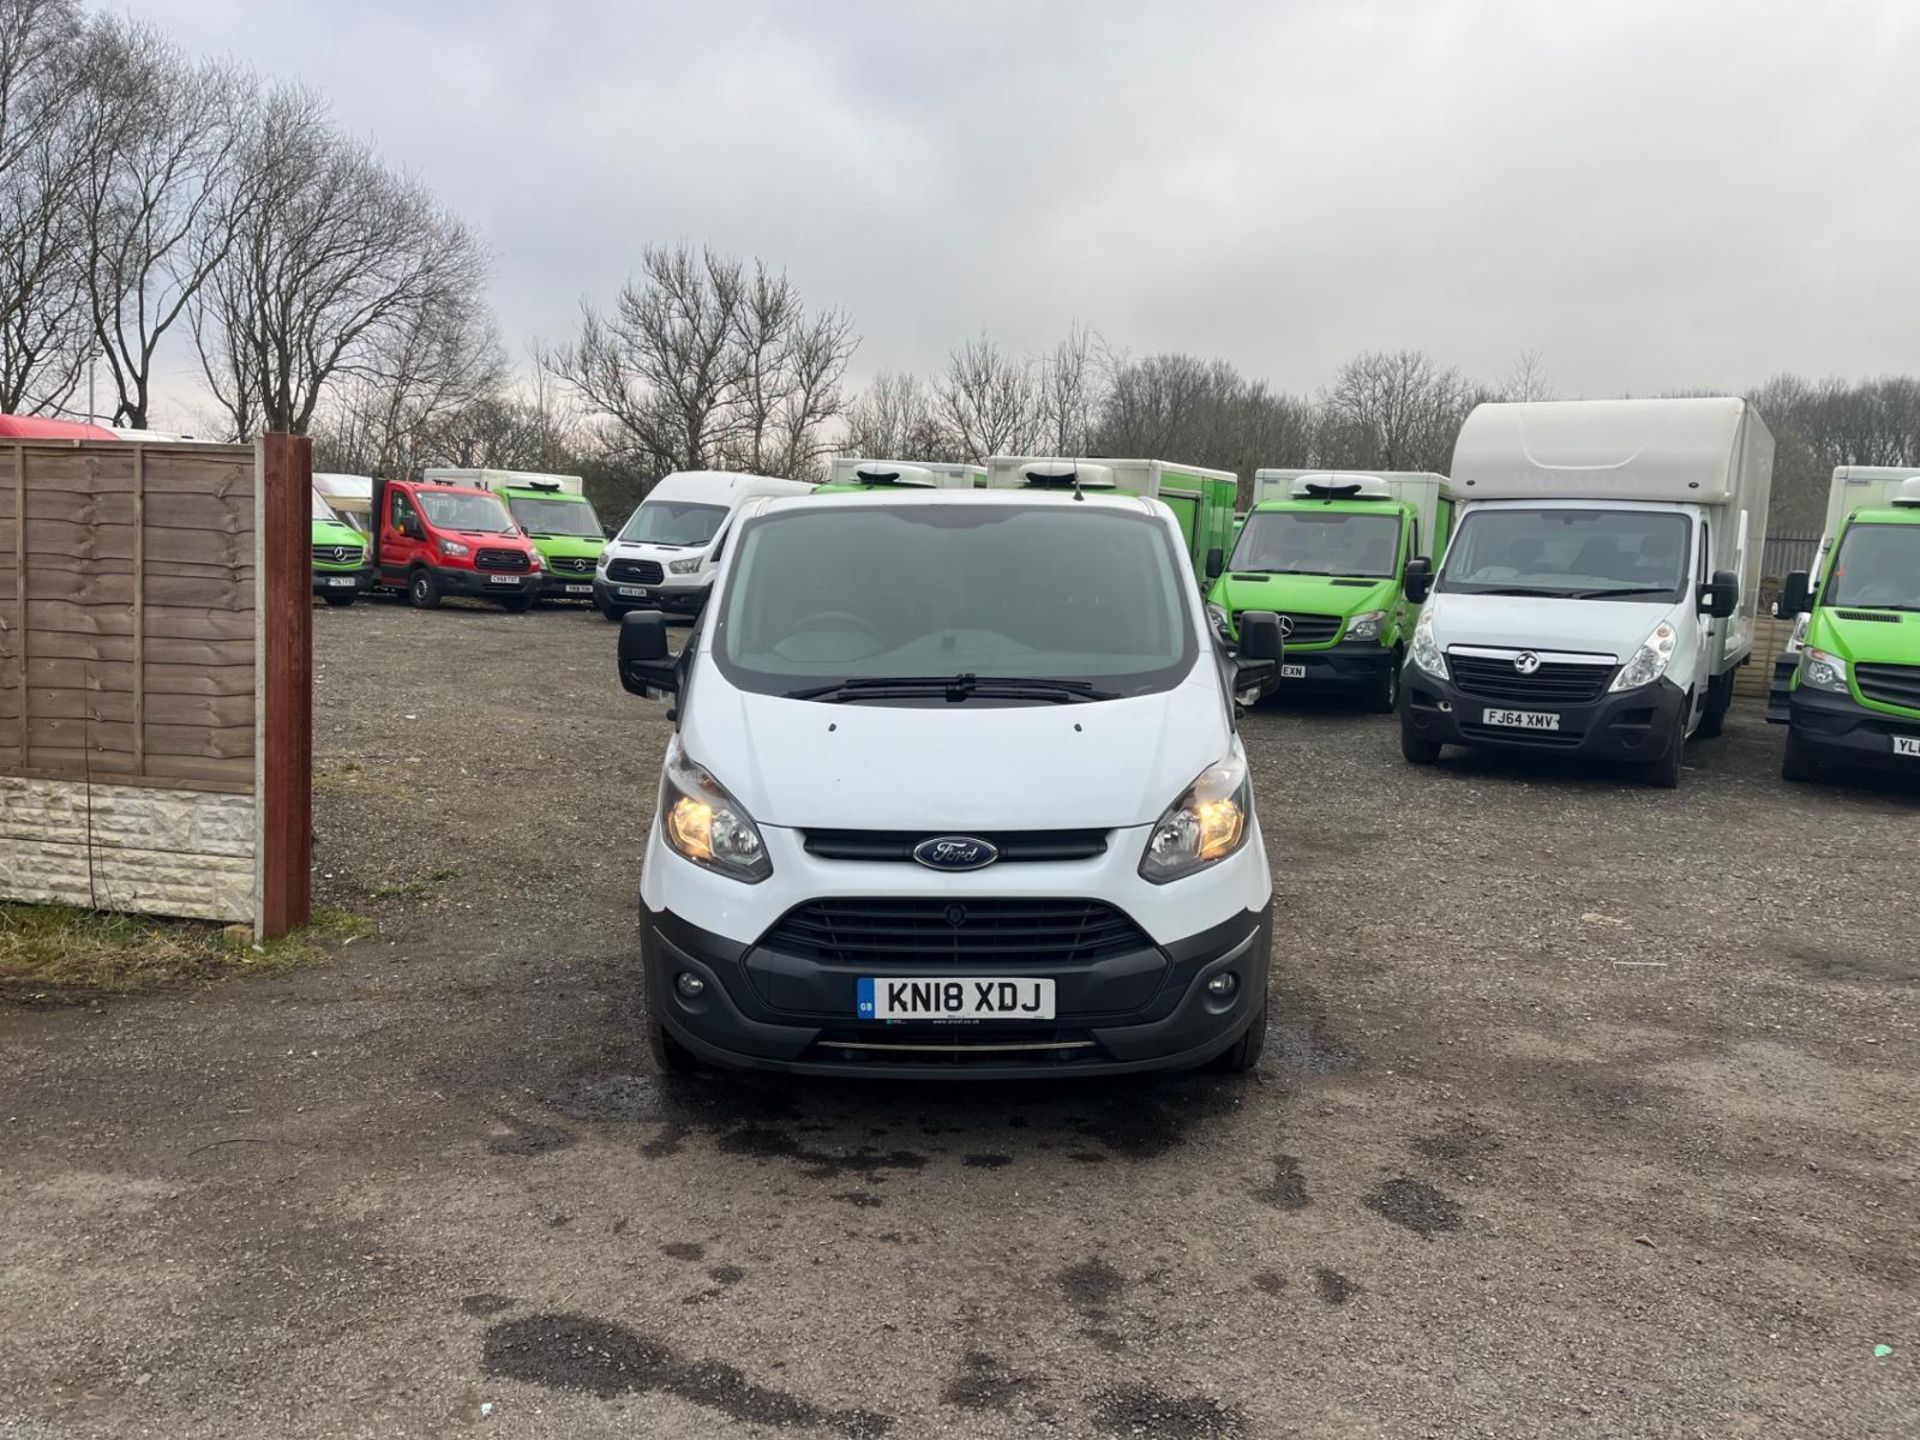 2018 FORD TRANSIT CUSTOM TDCI 130 L1 H1 SWB PANEL VAN ->>>SPECIAL CLEARANCE<<< - Image 2 of 15